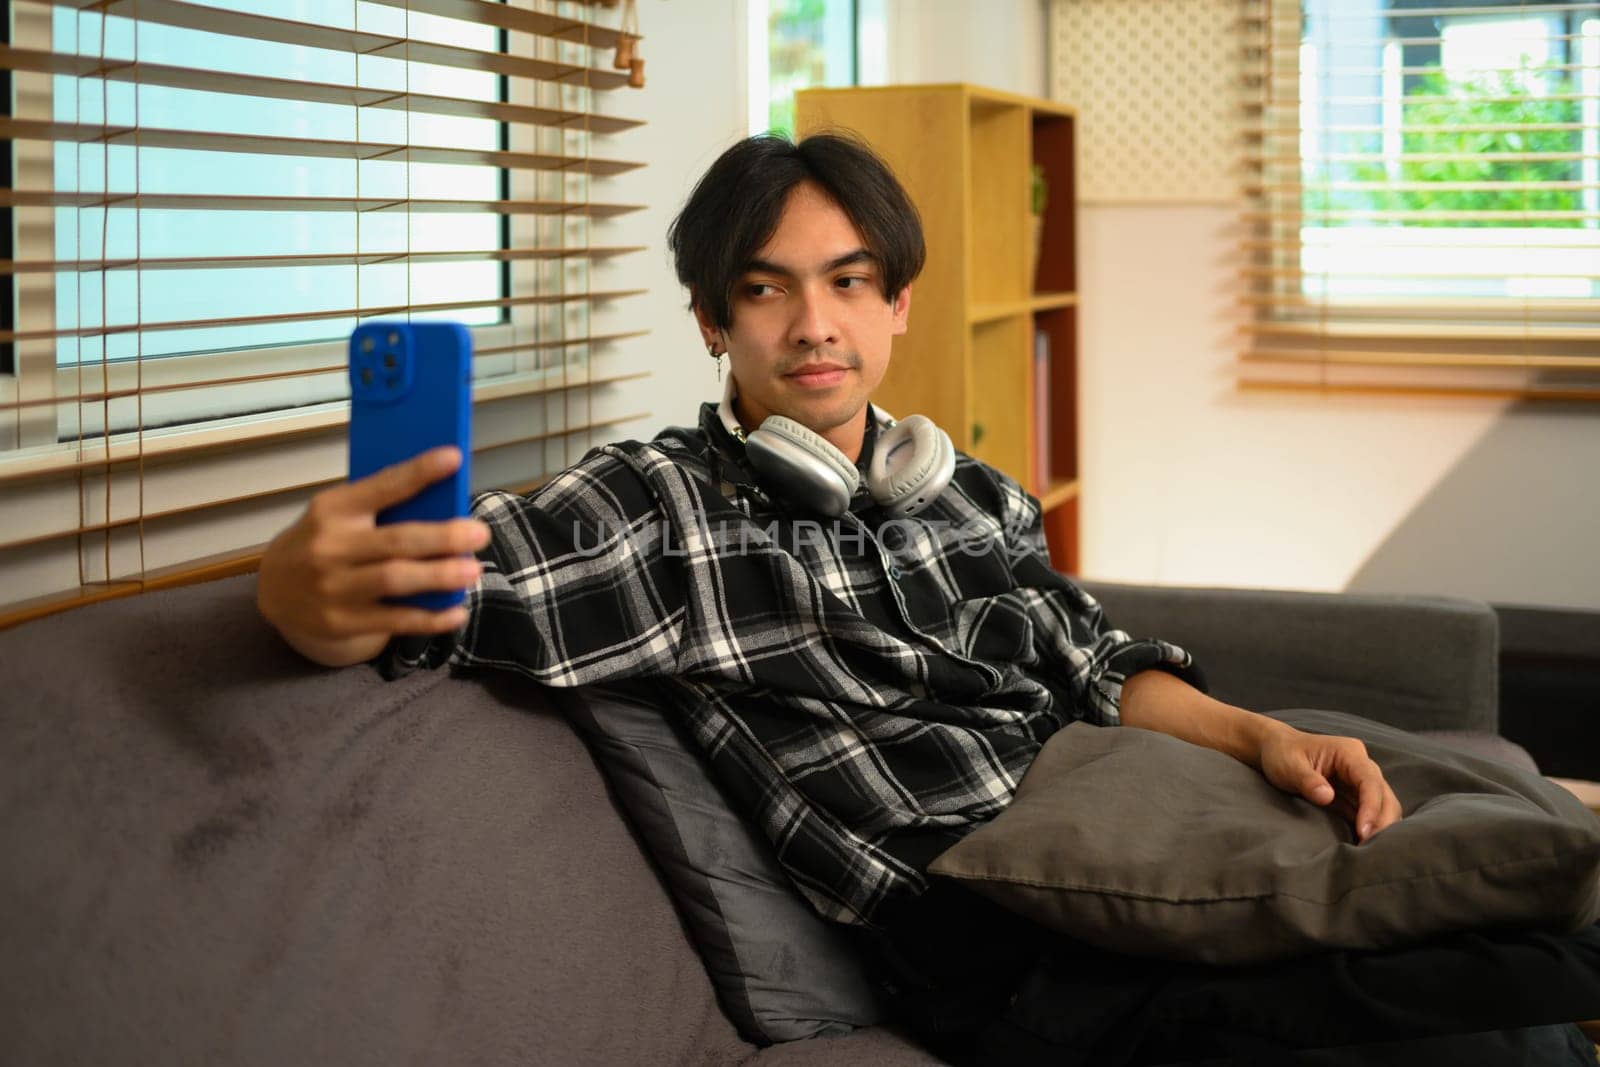 Portrait of young smiling man reading message on mobile phone, relaxing on couch at home.